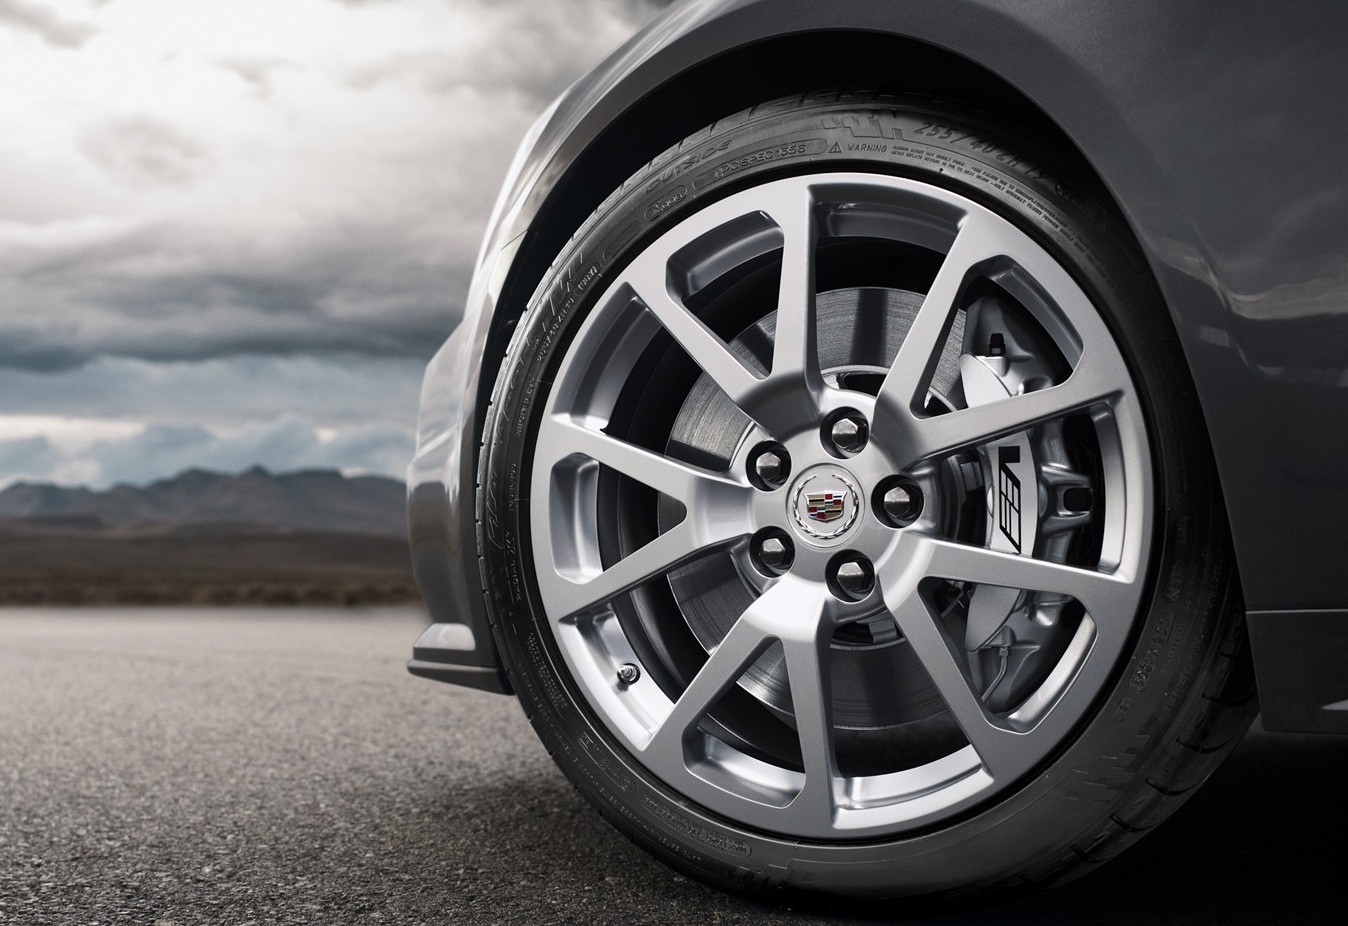 Purchase tyres from the best sources to enjoy a smooth and safe ride